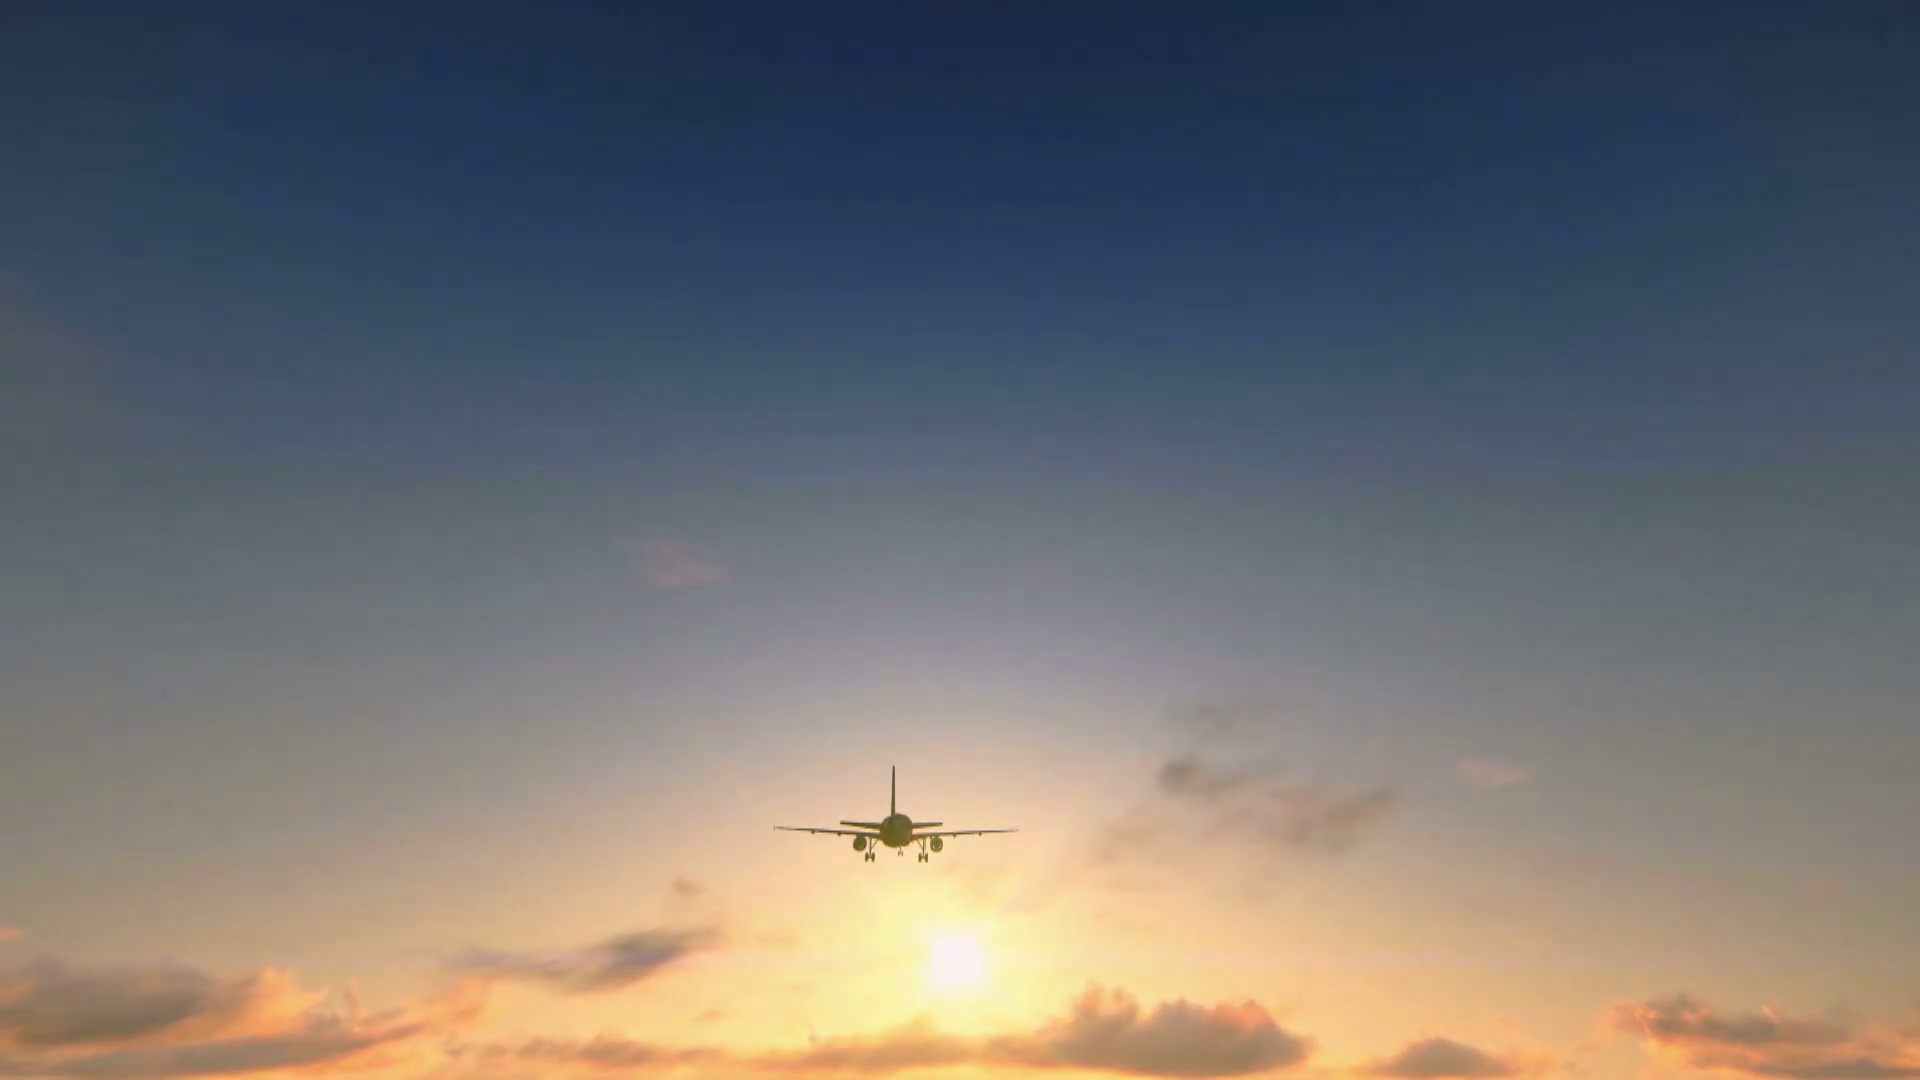 An image of an airplane in the sky during sunset.